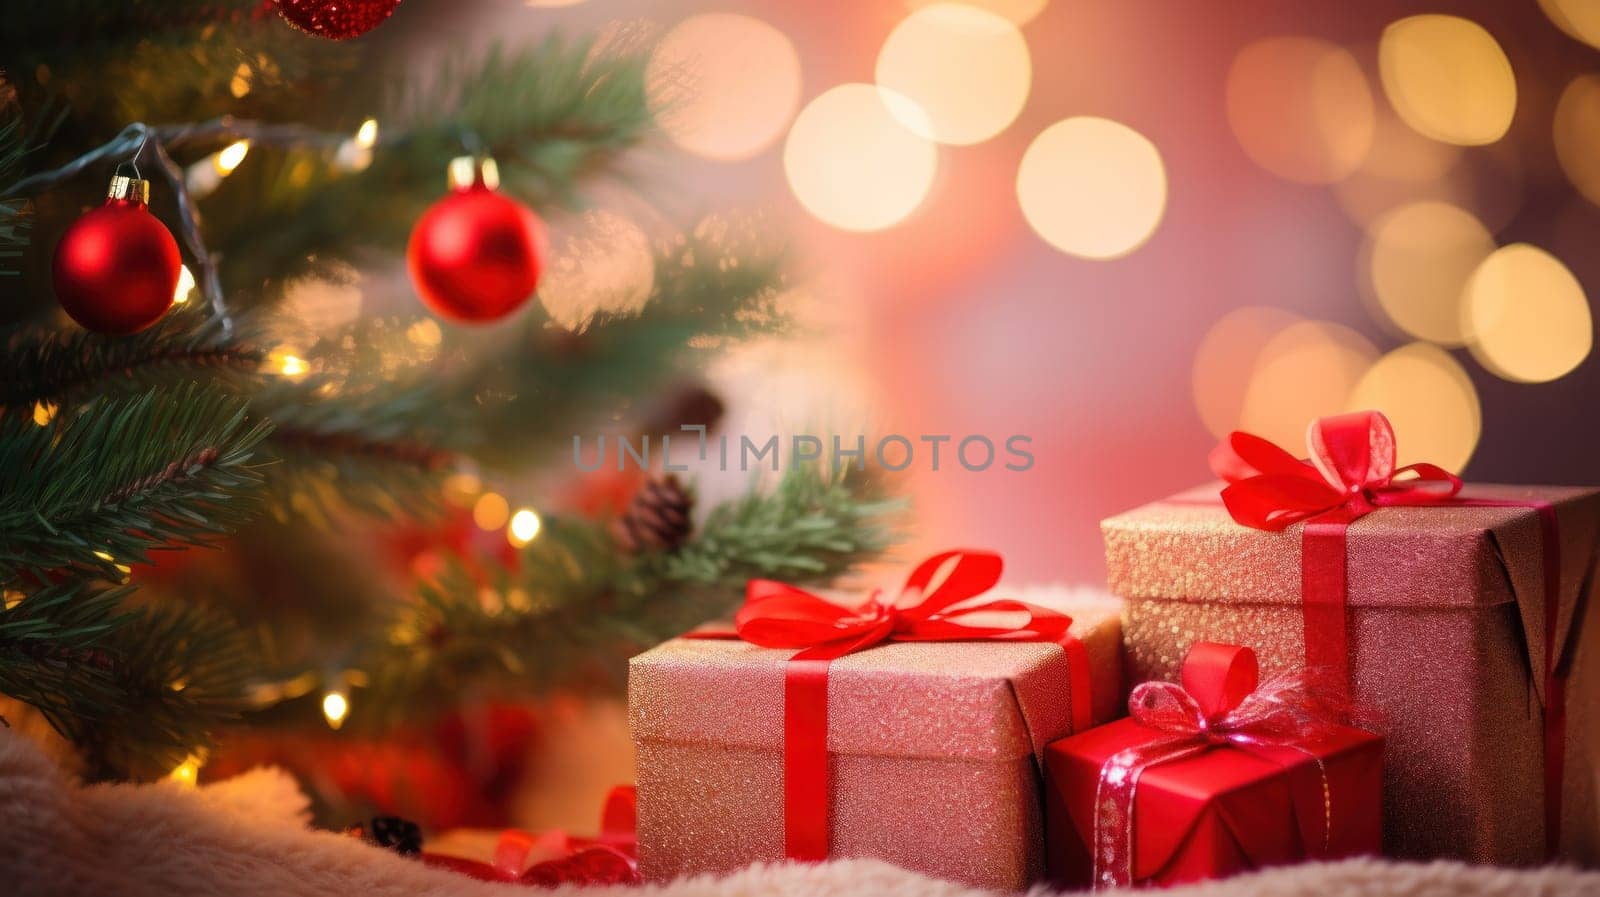 Christmas tree with gifts and decorations by simpson33